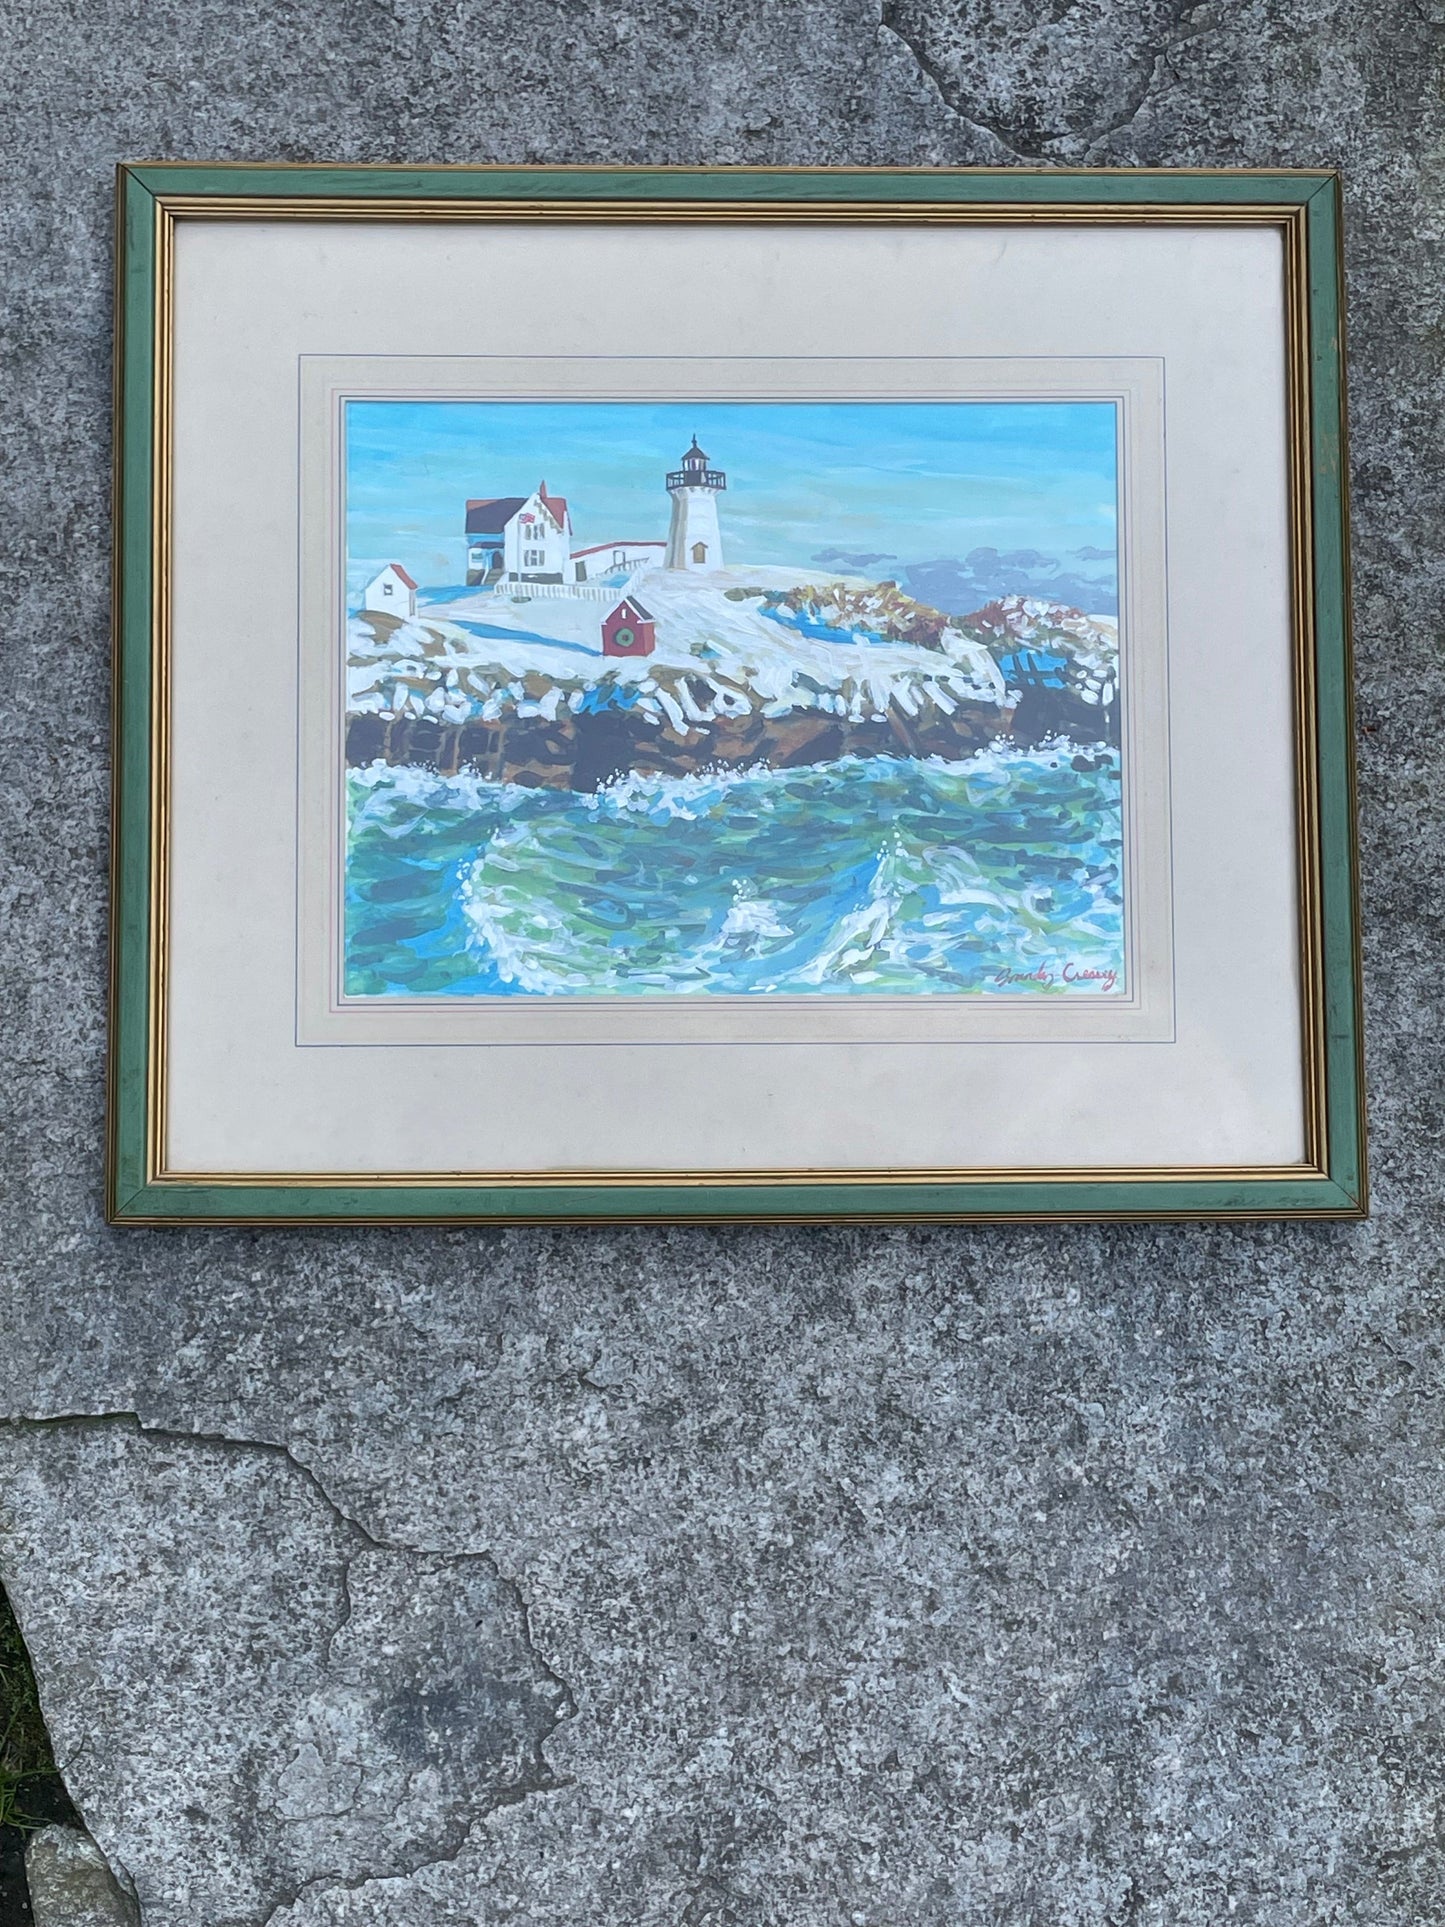 Nubble Lighthouse Painting - 8x10 Framed